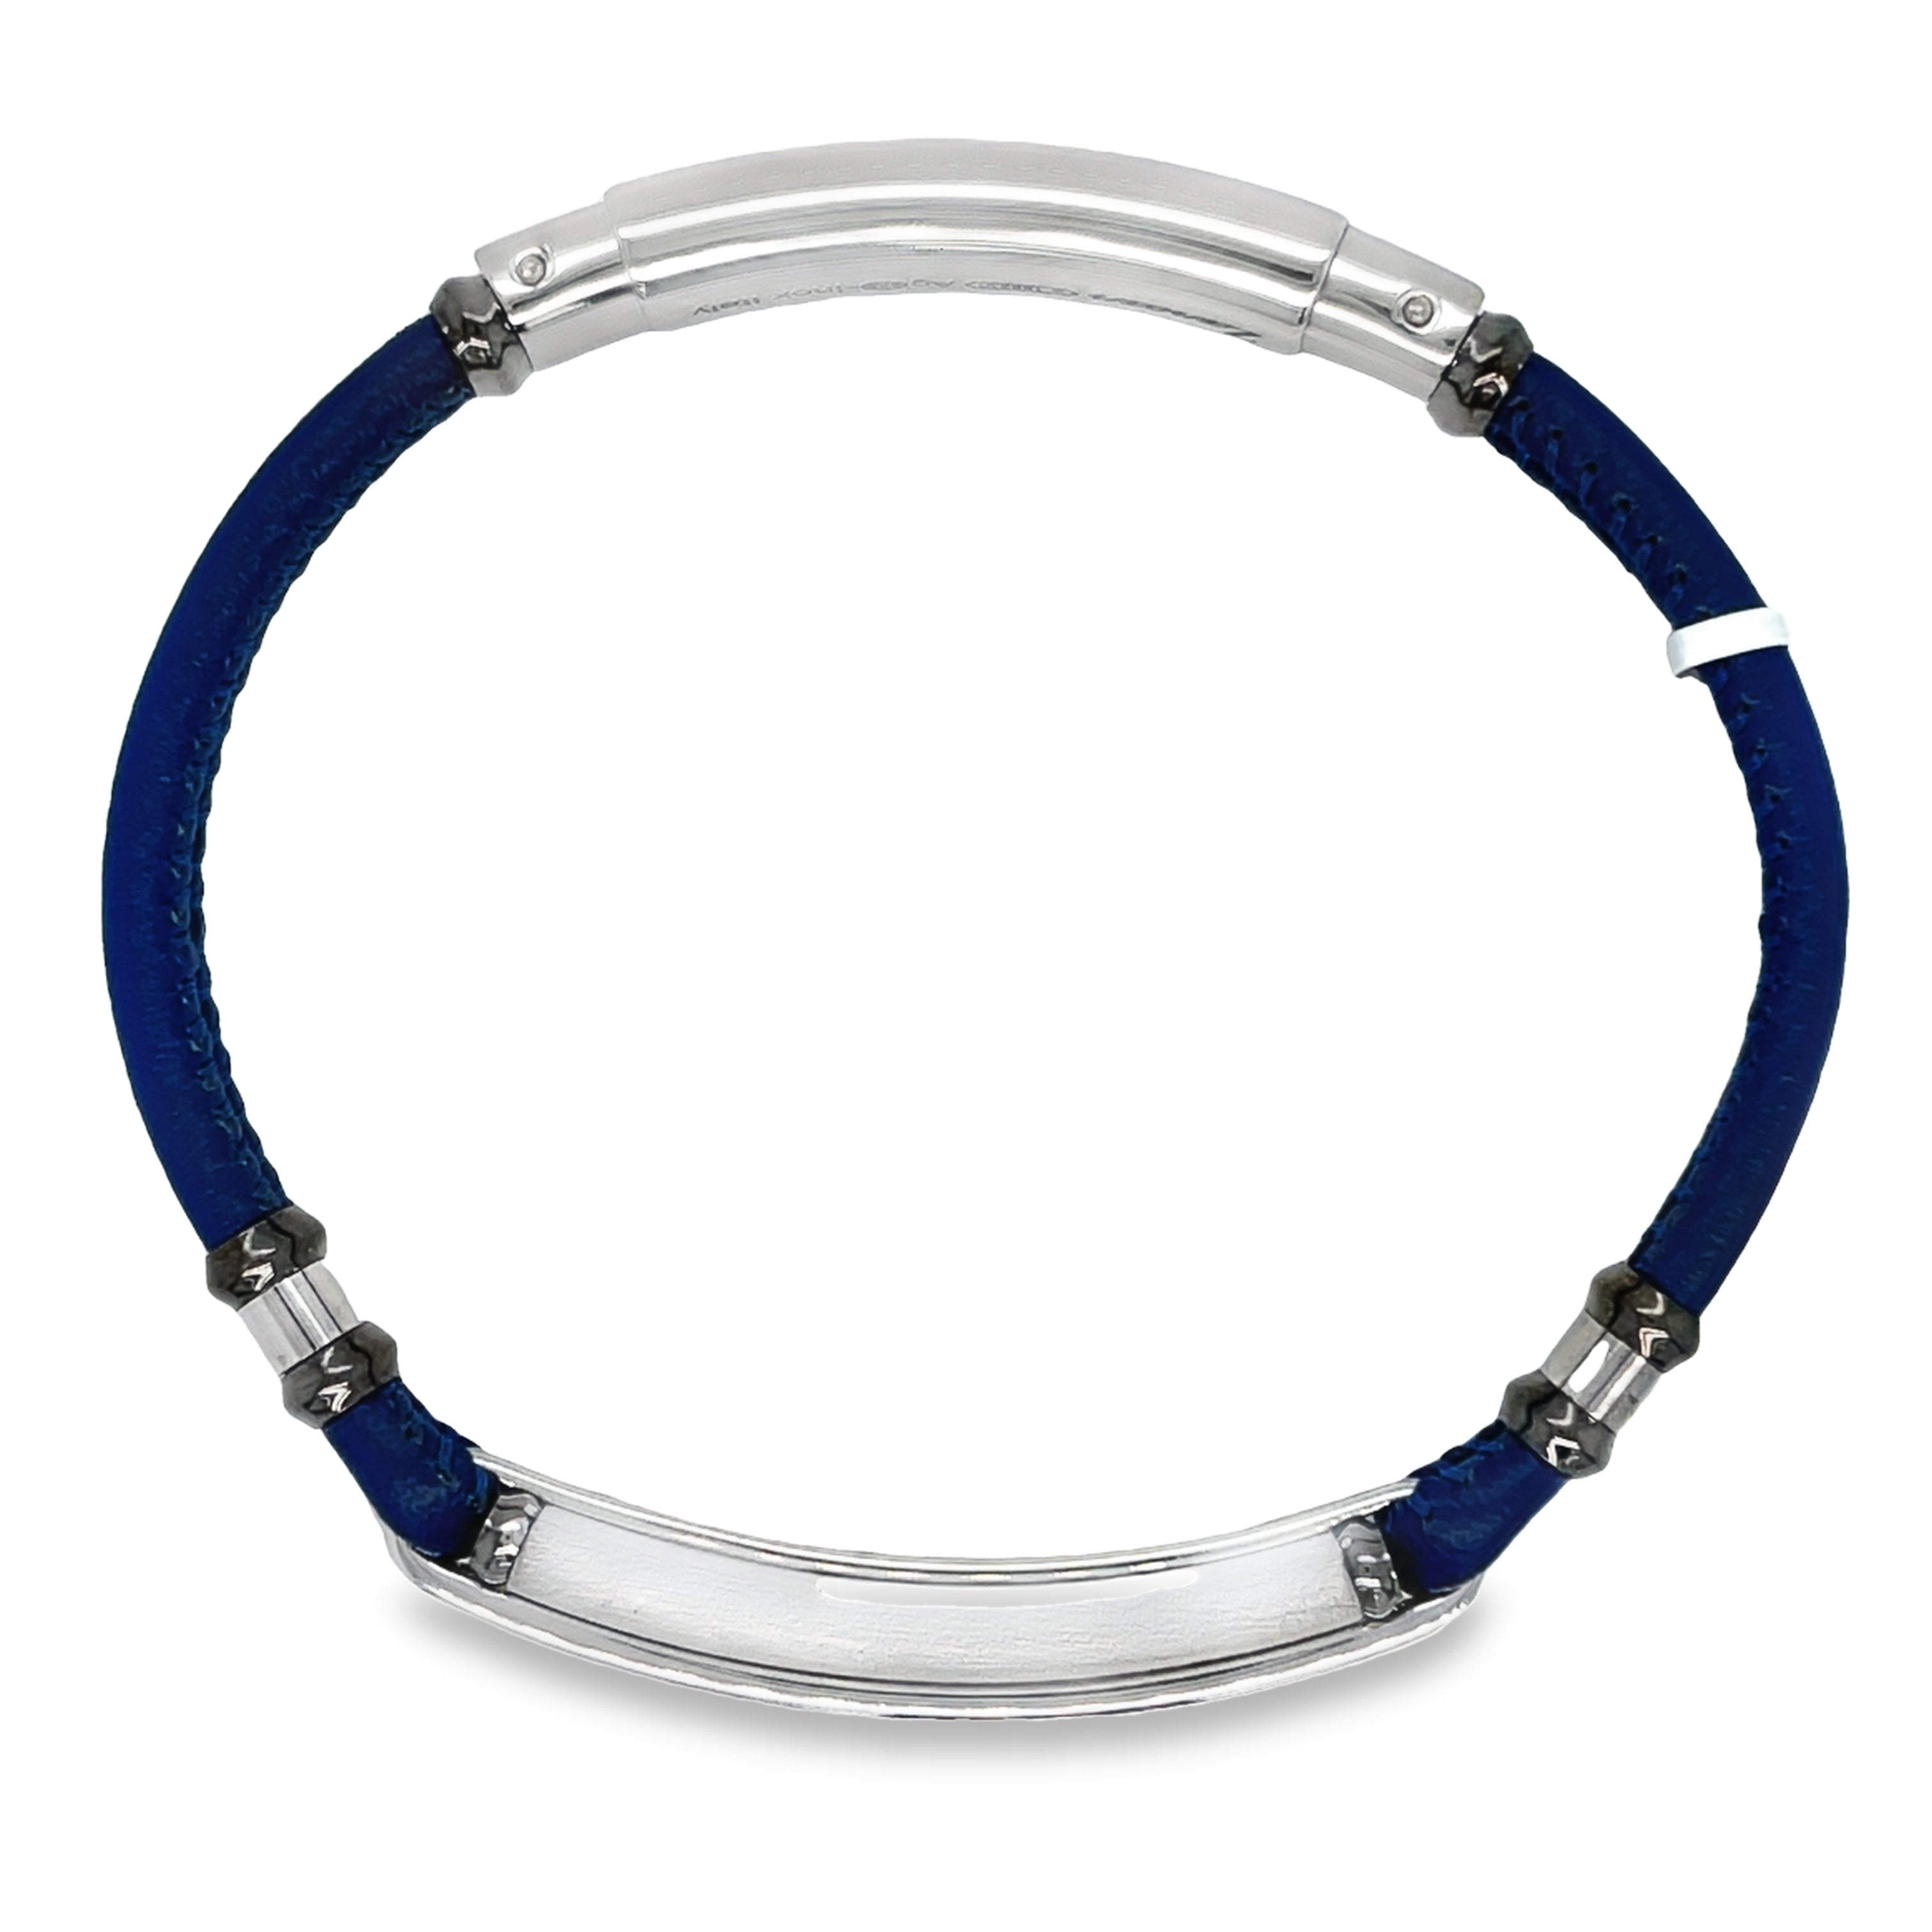 This Italian made Zancan bracelet features a blue leather band adorned with sparkling round spinel gems. Made of sterling silver, it offers an adjustable clasp for a perfect fit. Add a touch of elegance and sophistication to any outfit with this stunning piece.